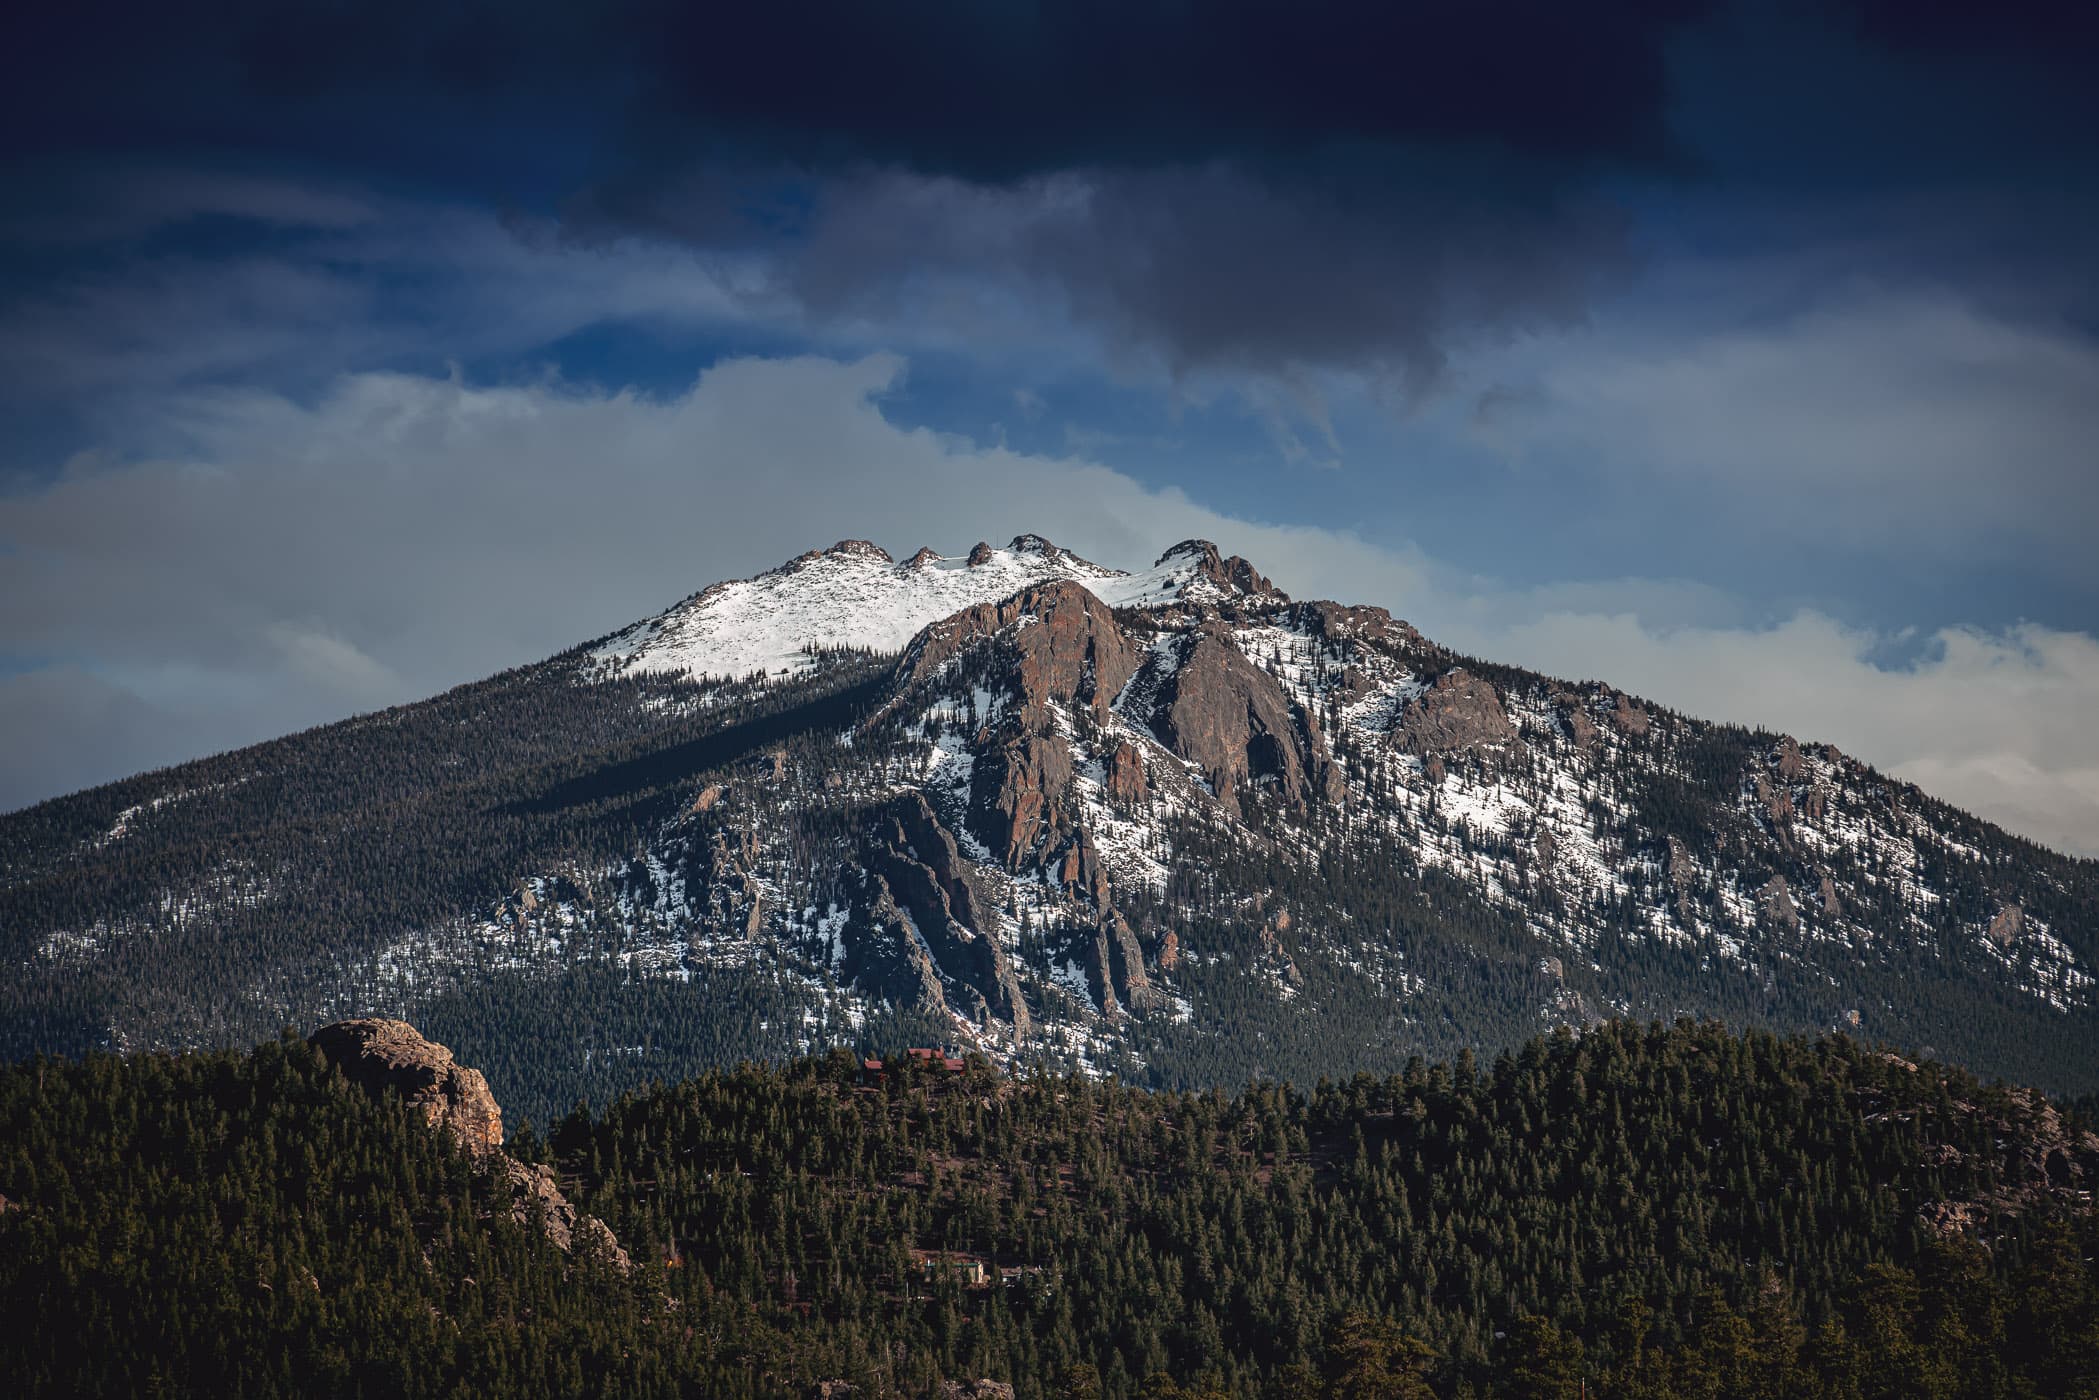 A snow-capped, rugged mountain at Colorado's Rocky Mountain National Park.